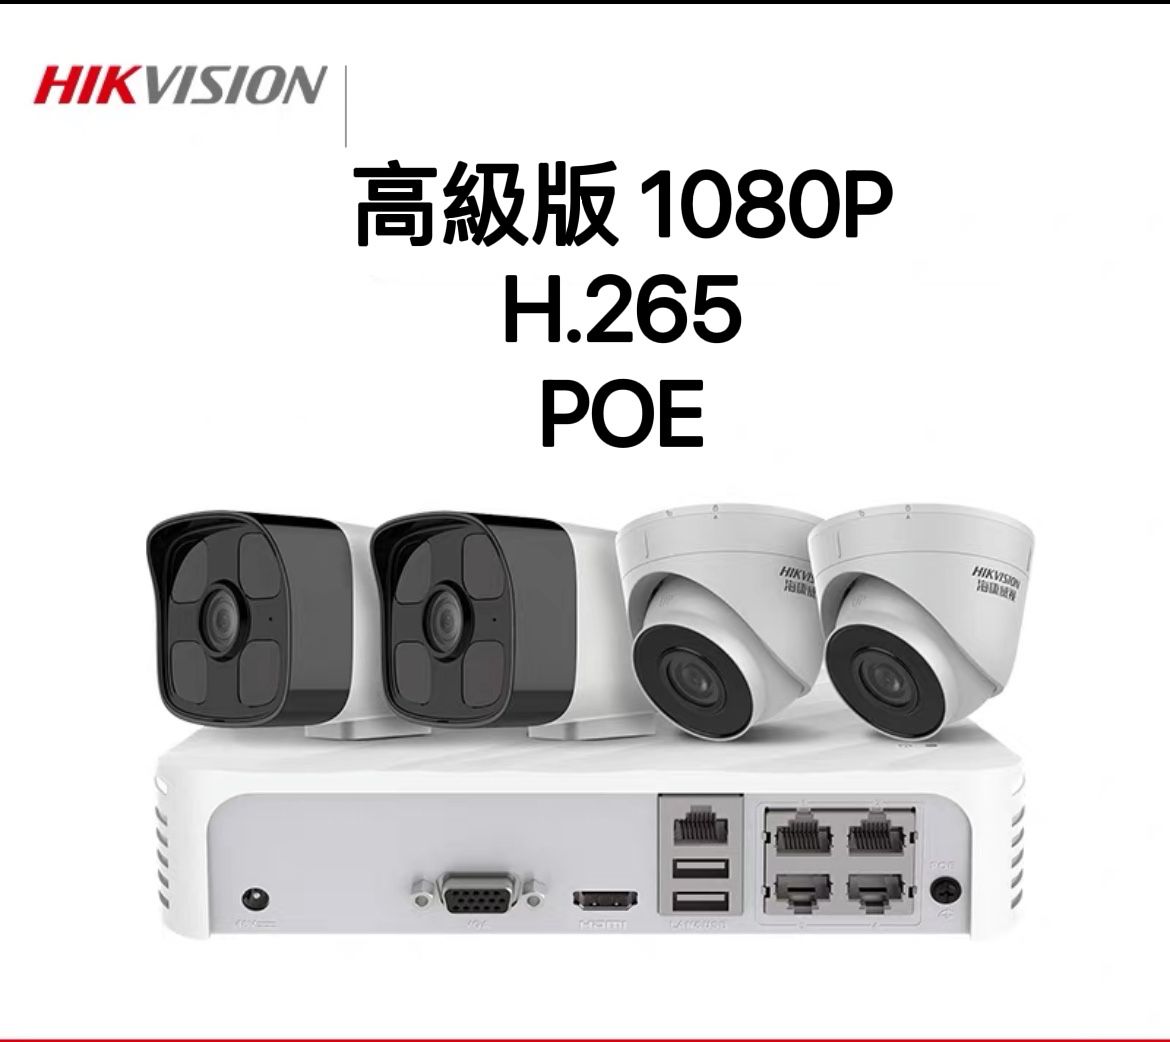 Hikvision 200MP 10180P CCTV 1-4CH Package